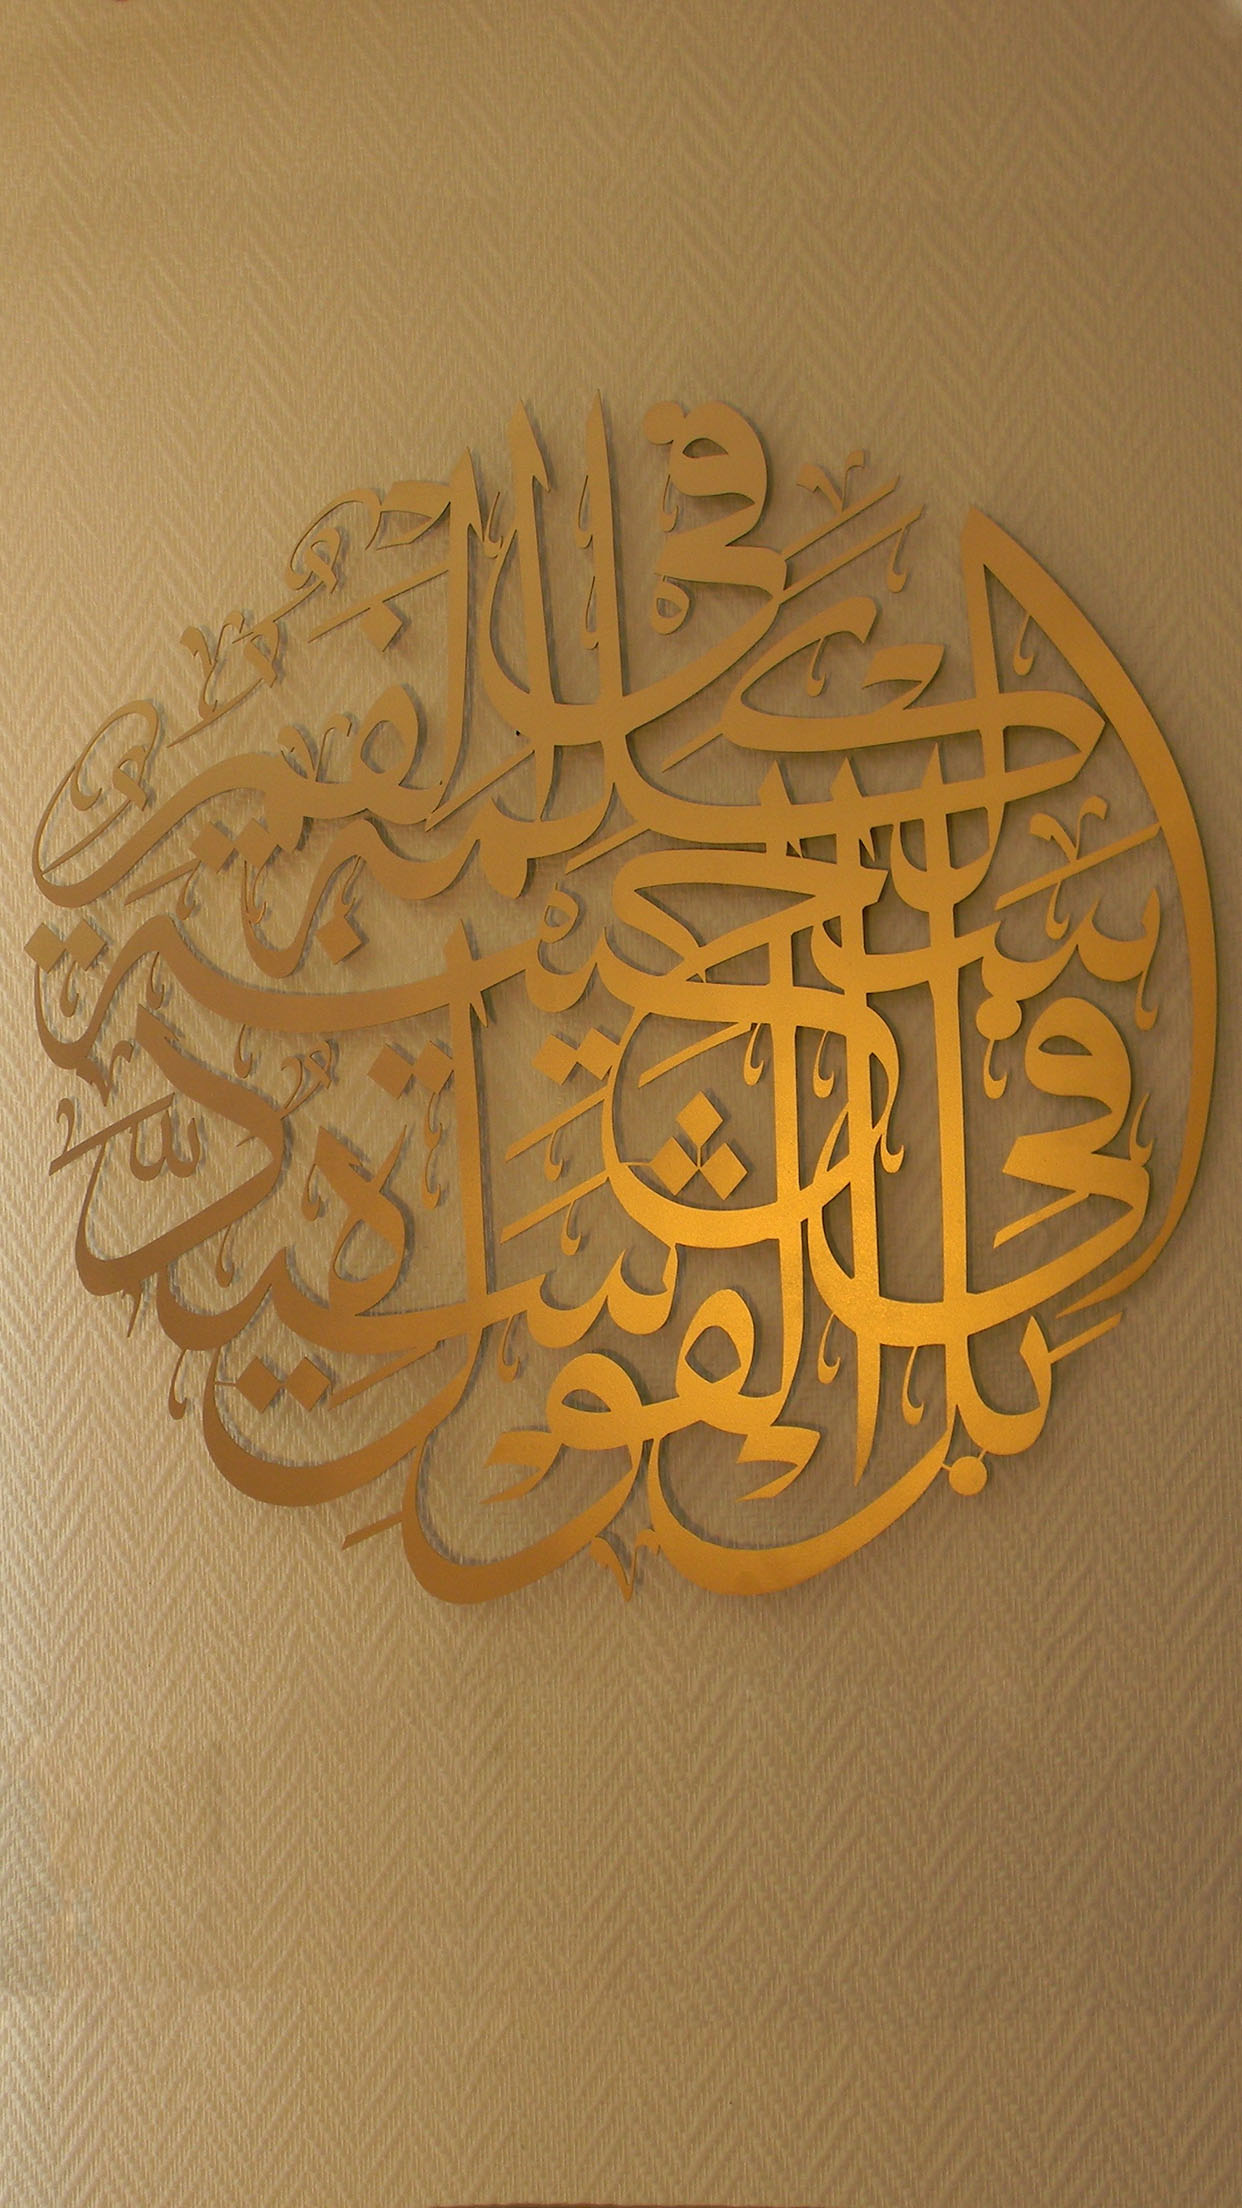 Arabic calligraphy 2 Wallpaper for iPhone Pro Max, X, 6